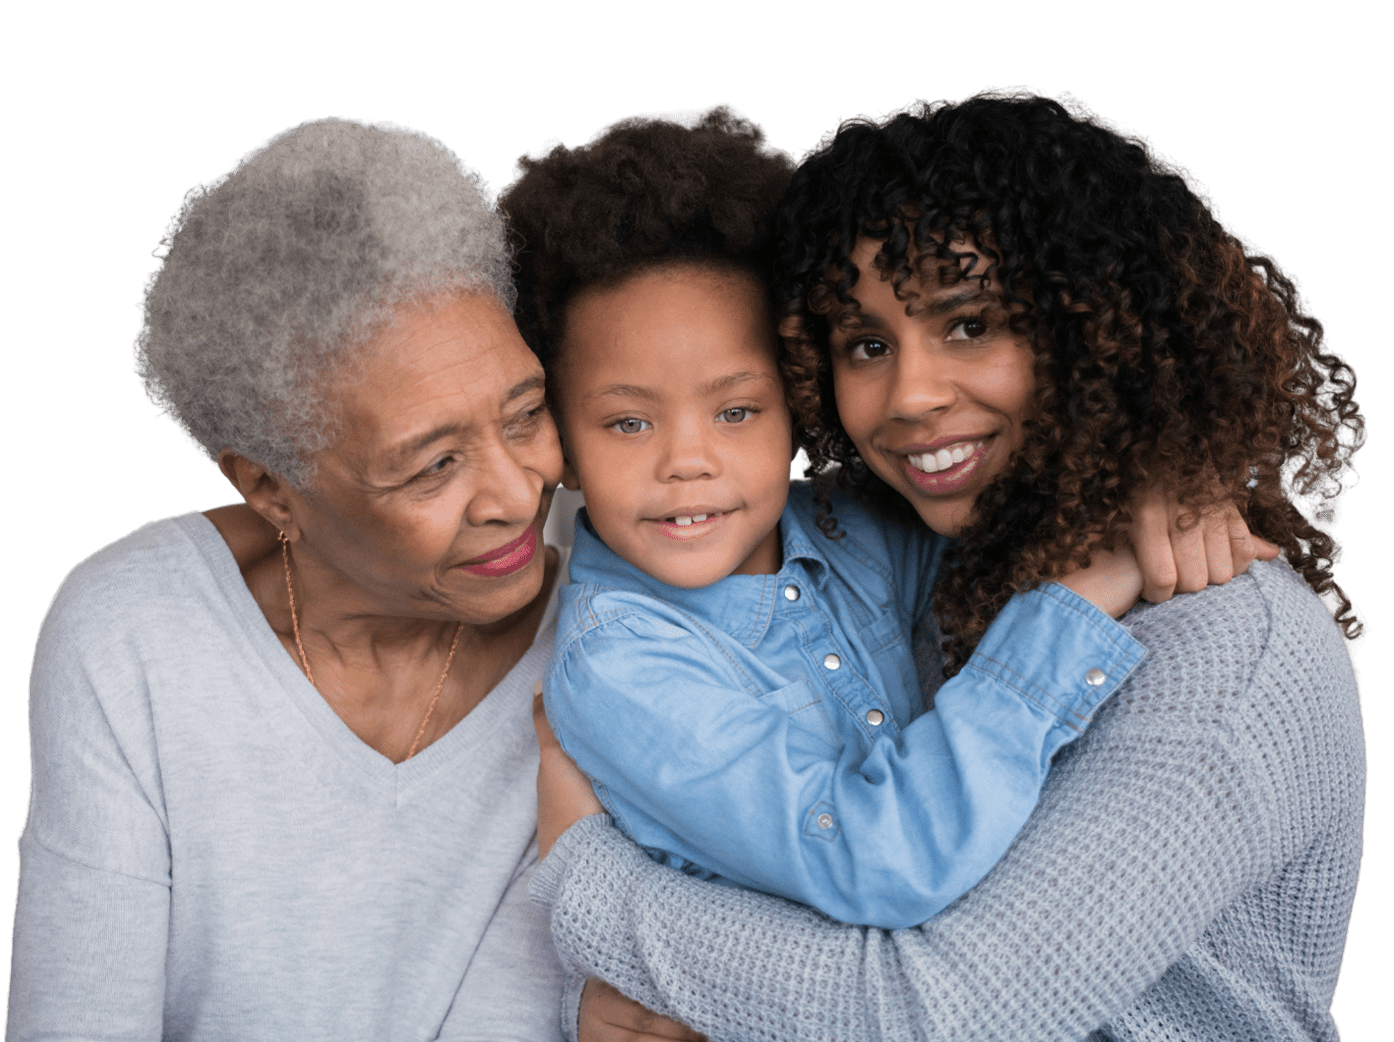 Three generations of women embrace each other 